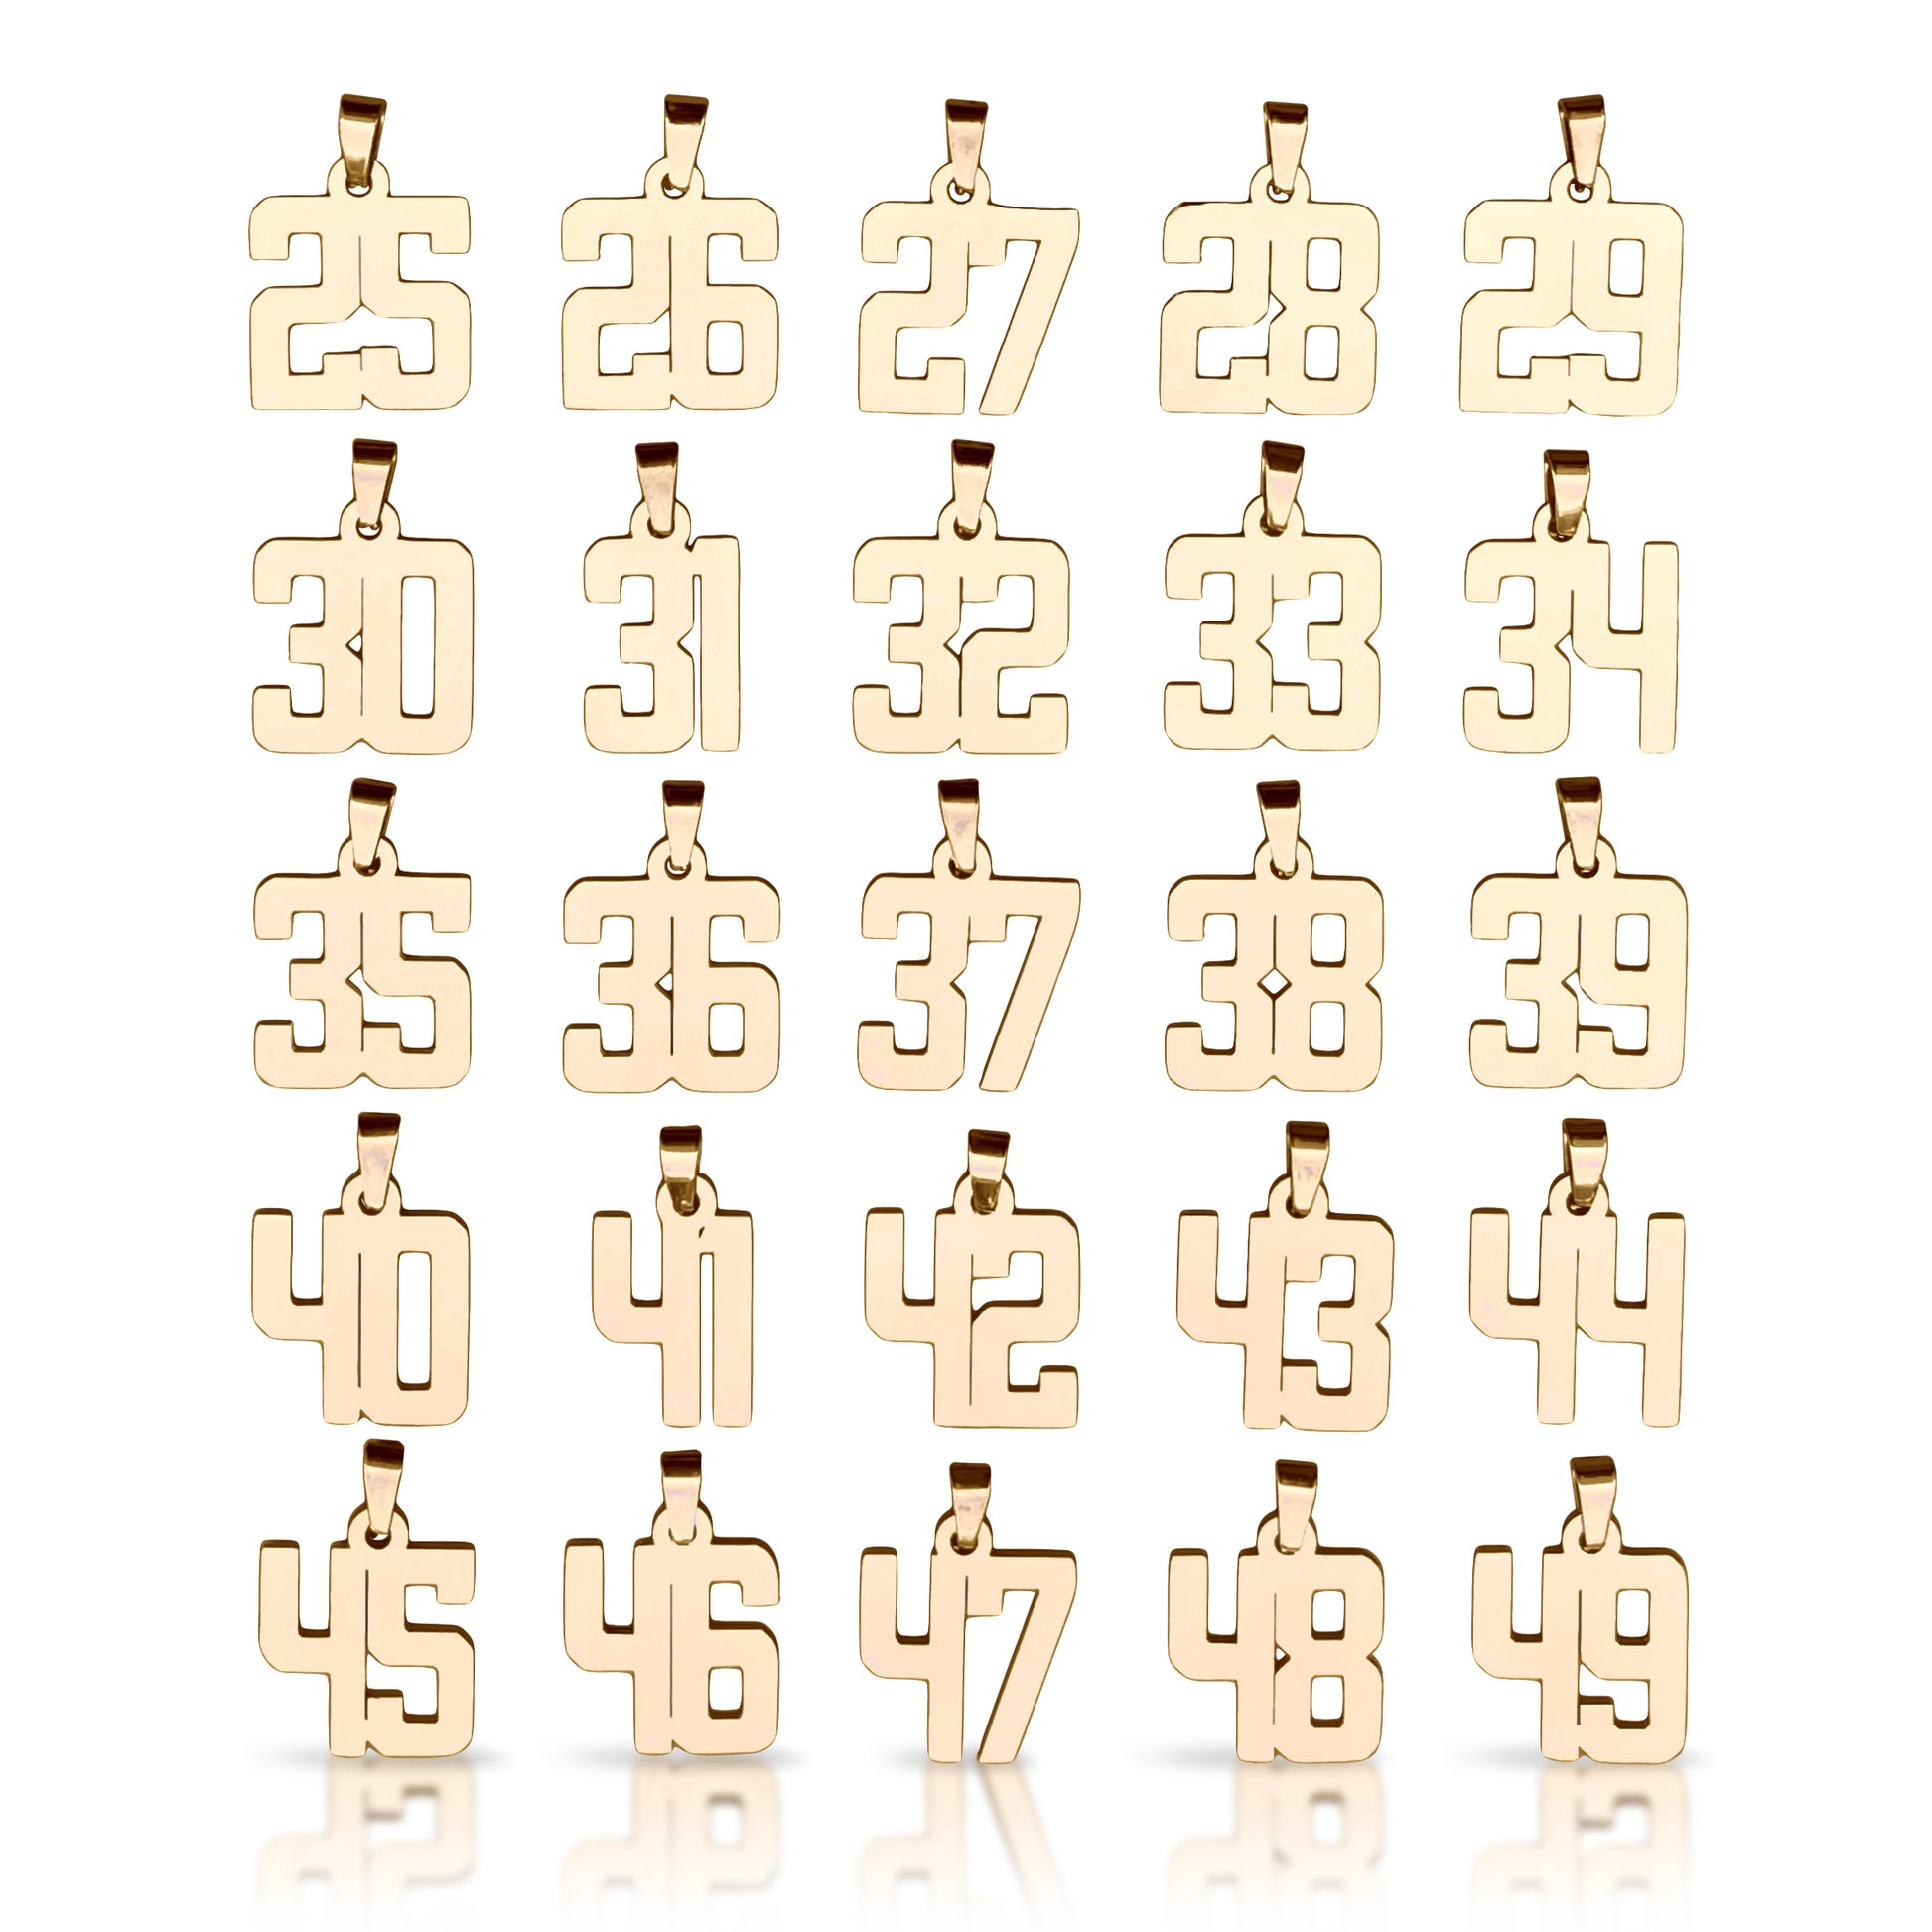 Custom Number Pendant With Chain Necklace - 14K Gold Plated Stainless Steel